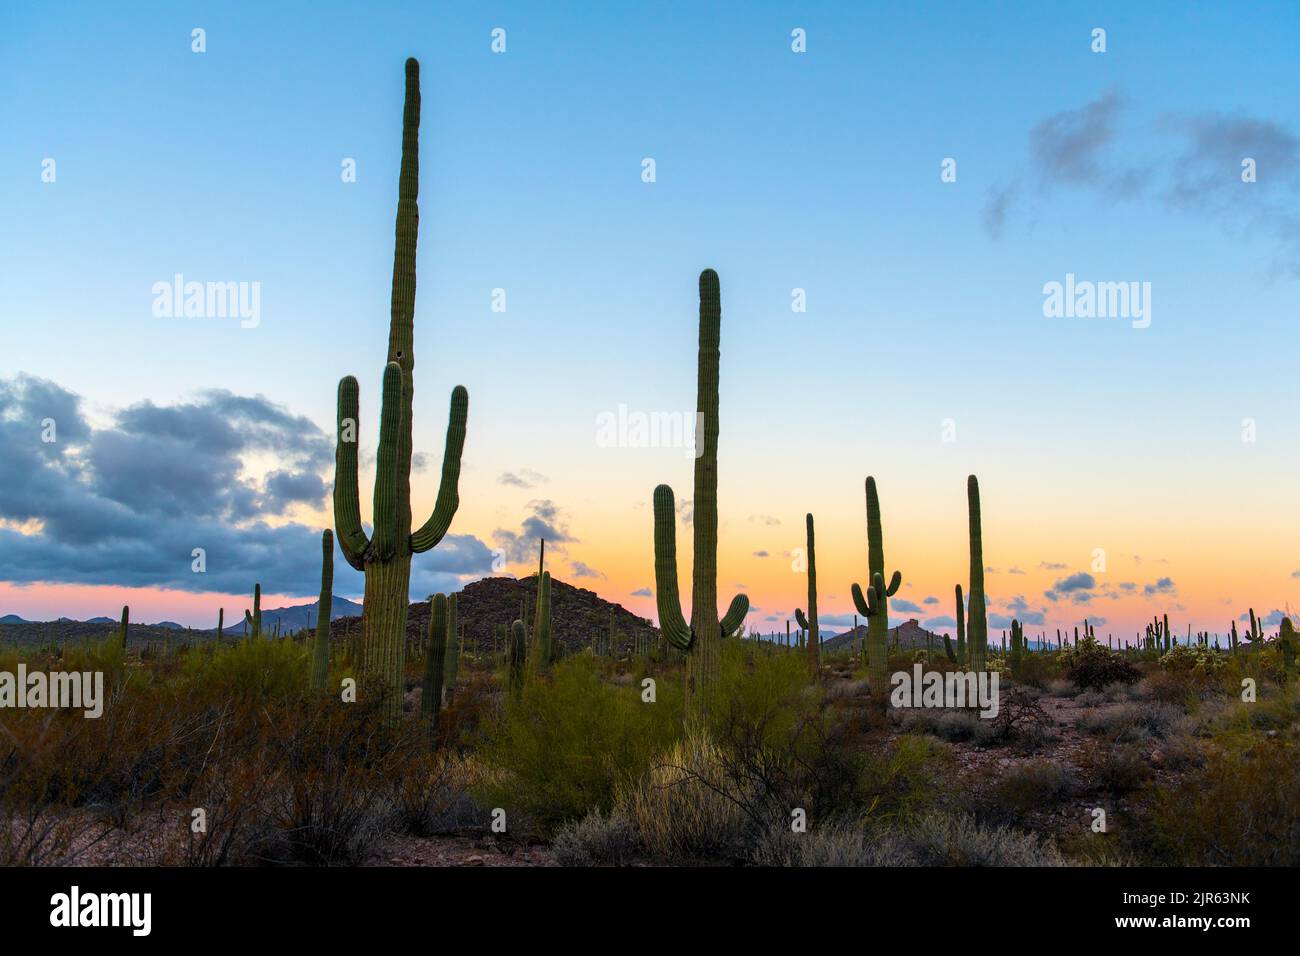 Sunrize in Organ Pipe Cactus National Monument, southern Arizona. Stock Photo